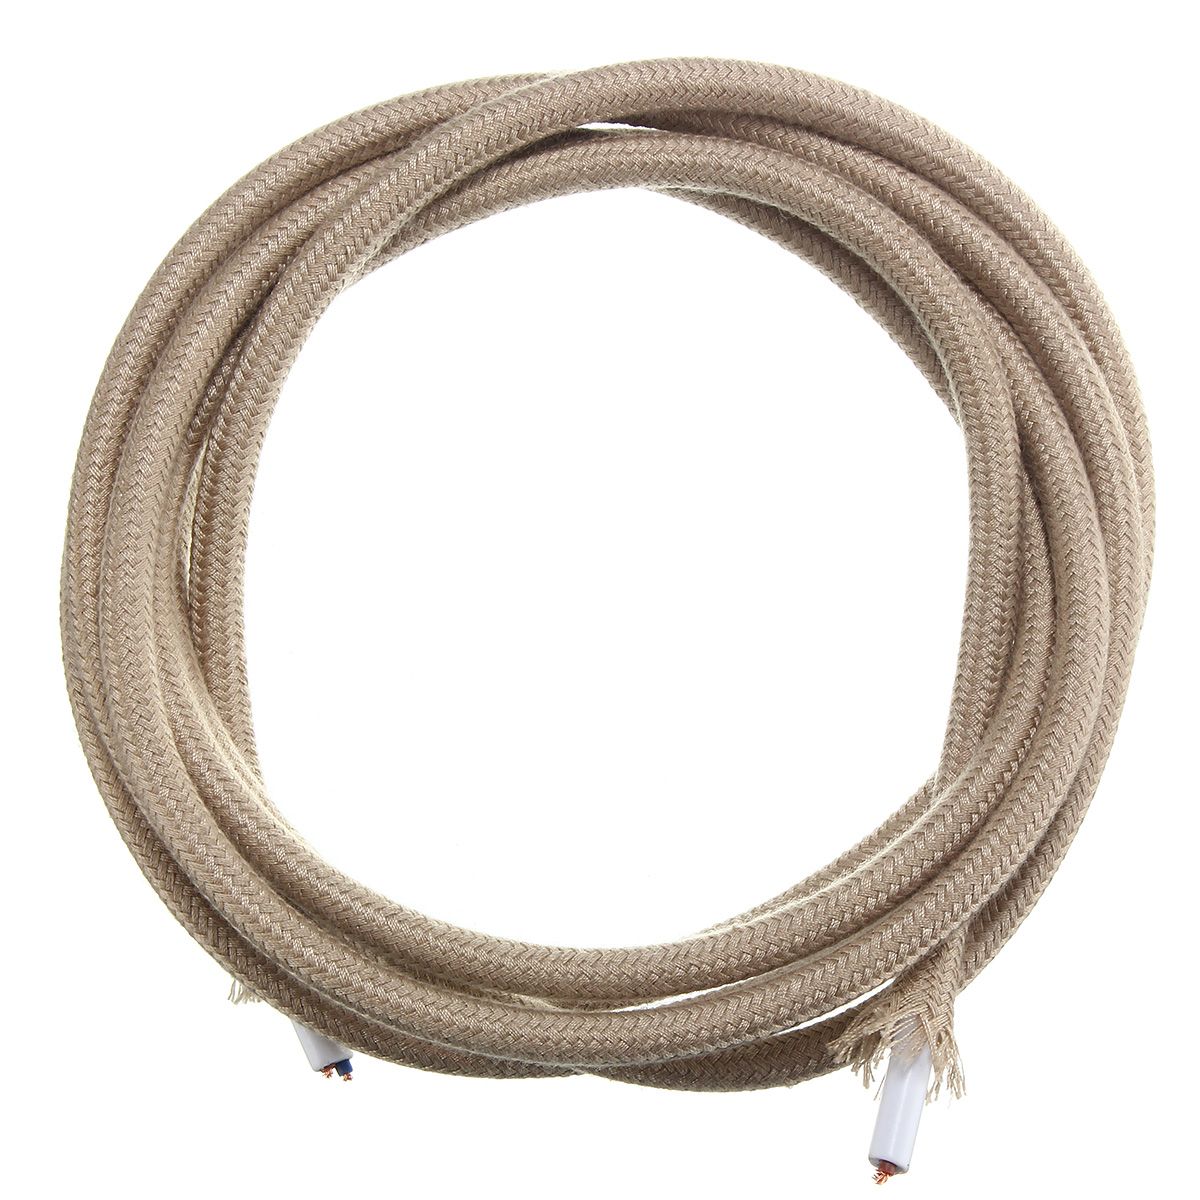 3M-2-Cord-Color-Vintage-Twist-Braided-Fabric-Light-Cable-Electric-Wire-1069143